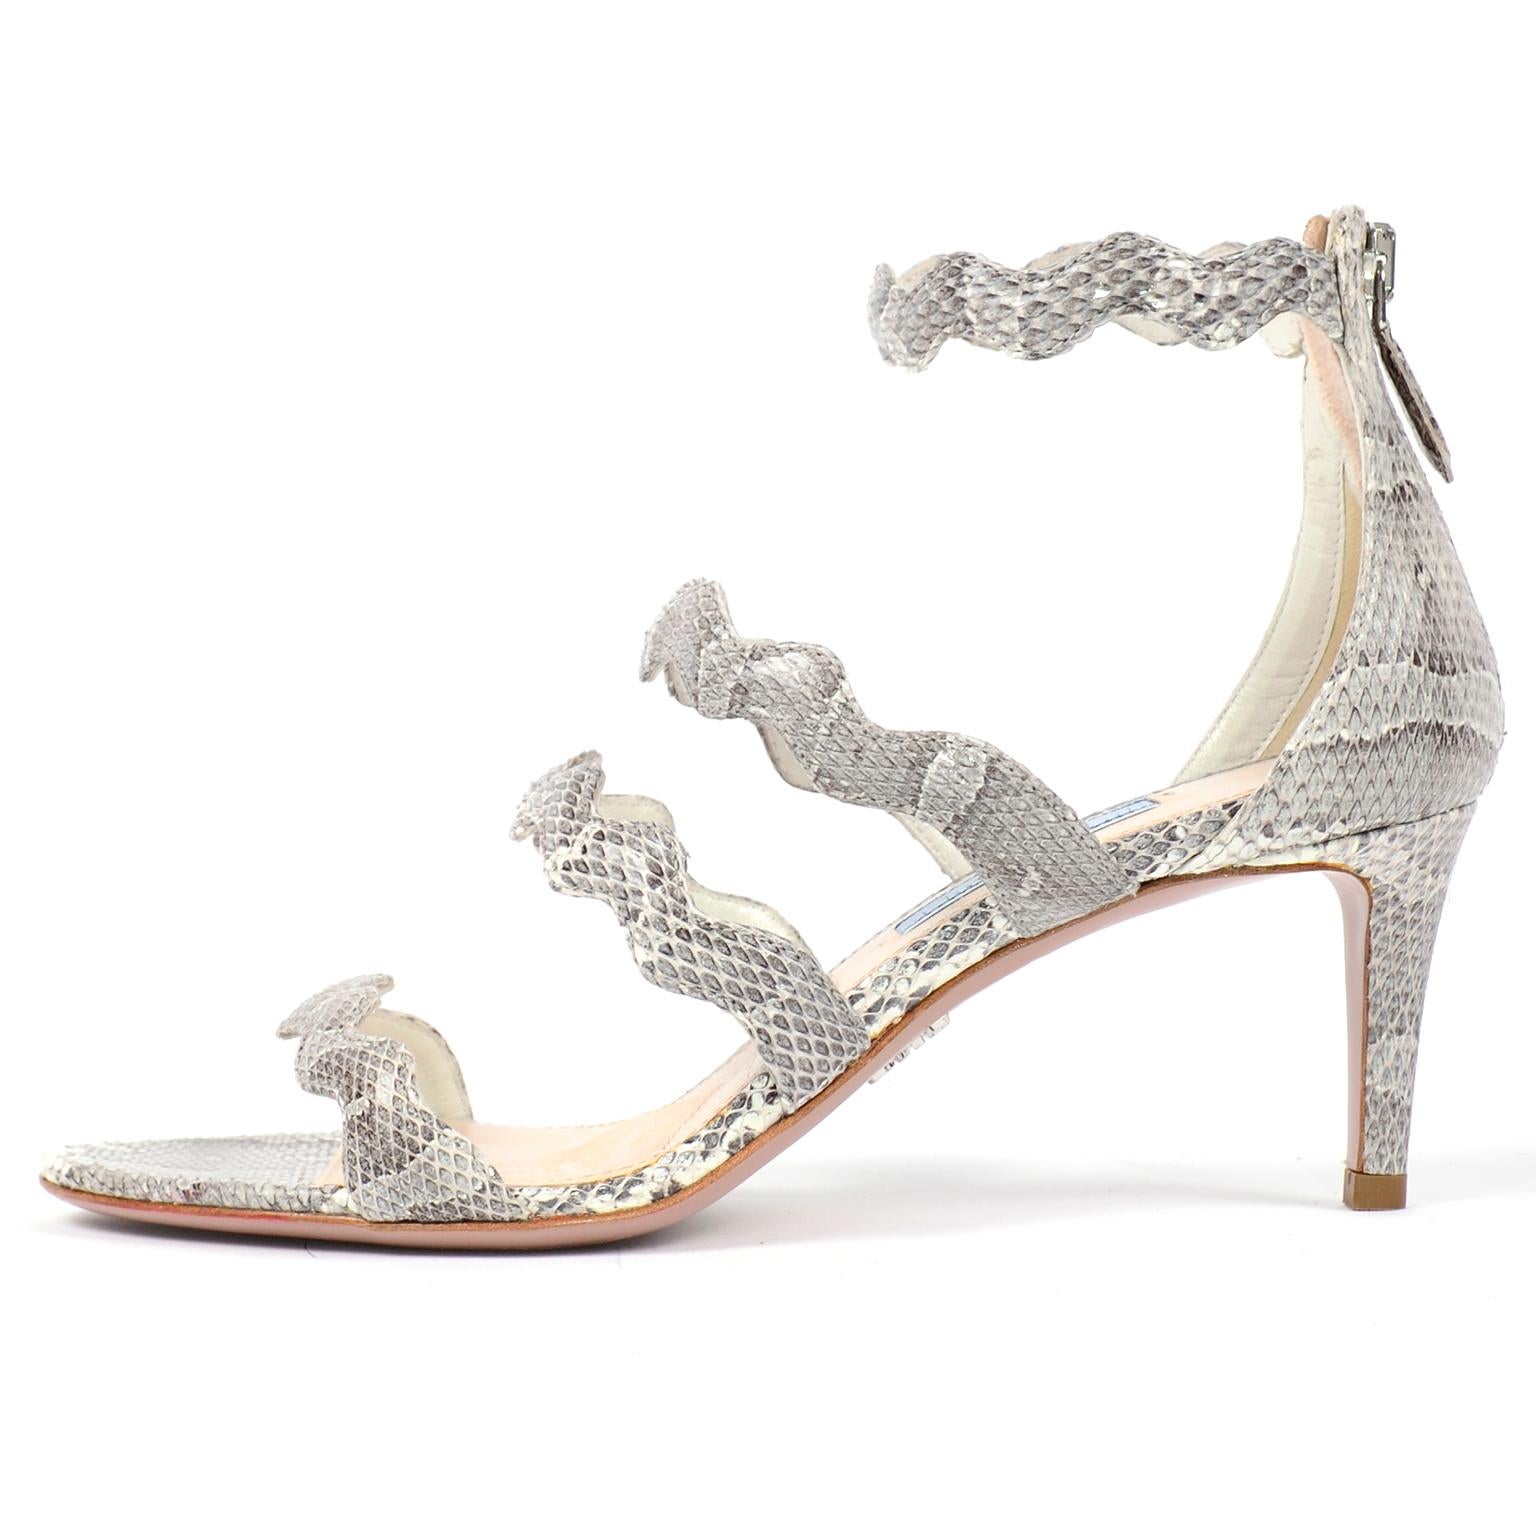 Prada Calzature Donna Roccia Snakeskin Wavy Ankle Strap Heeled Sandals  In Excellent Condition For Sale In Portland, OR